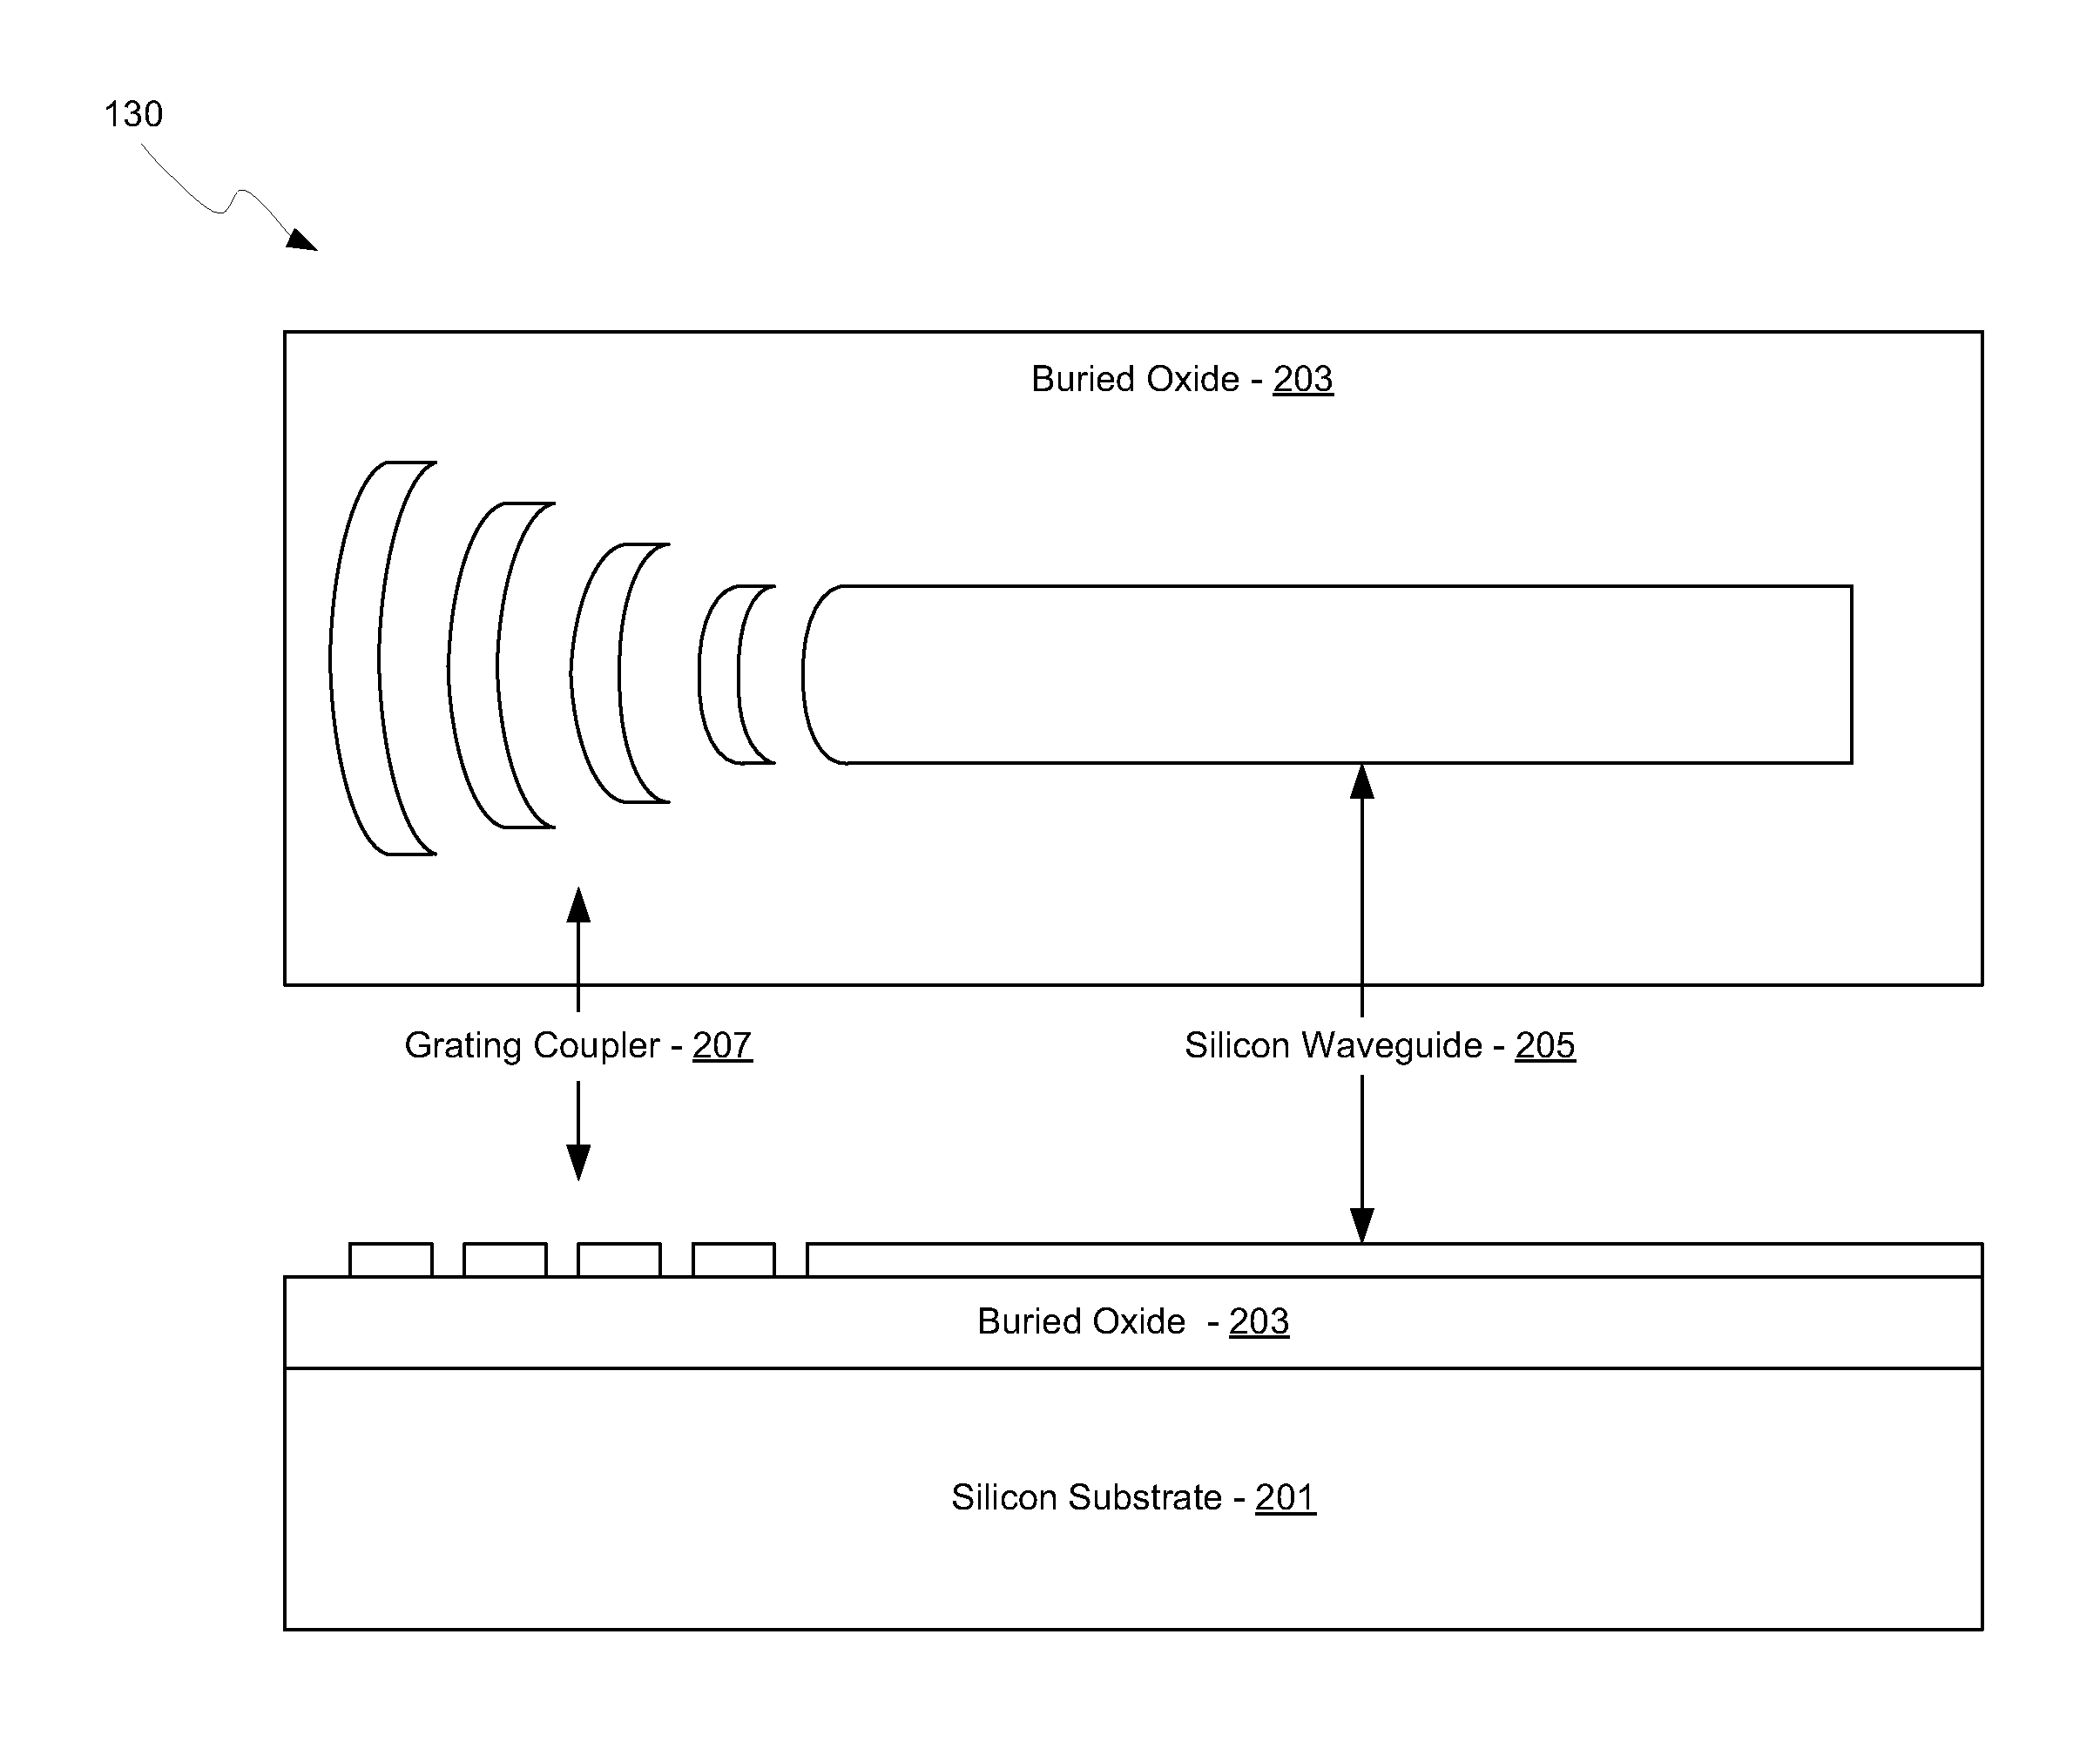 Method and System For Coupling Optical Signals Into Silicon Optoelectronic Chips